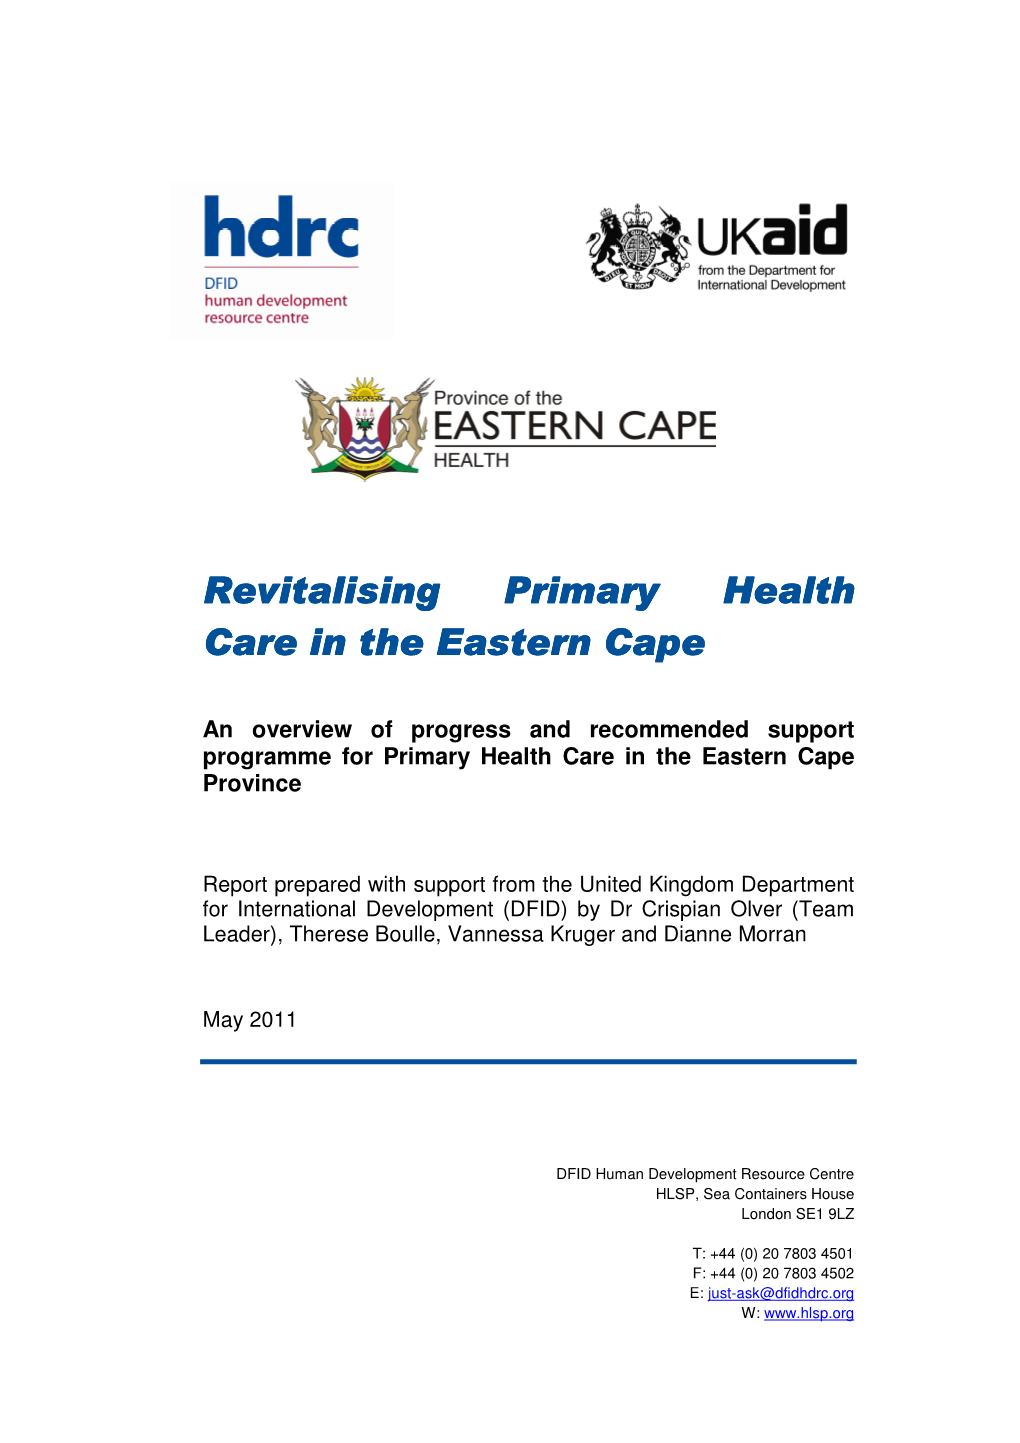 Revitalising Primary Health Care in the Eastern Cape